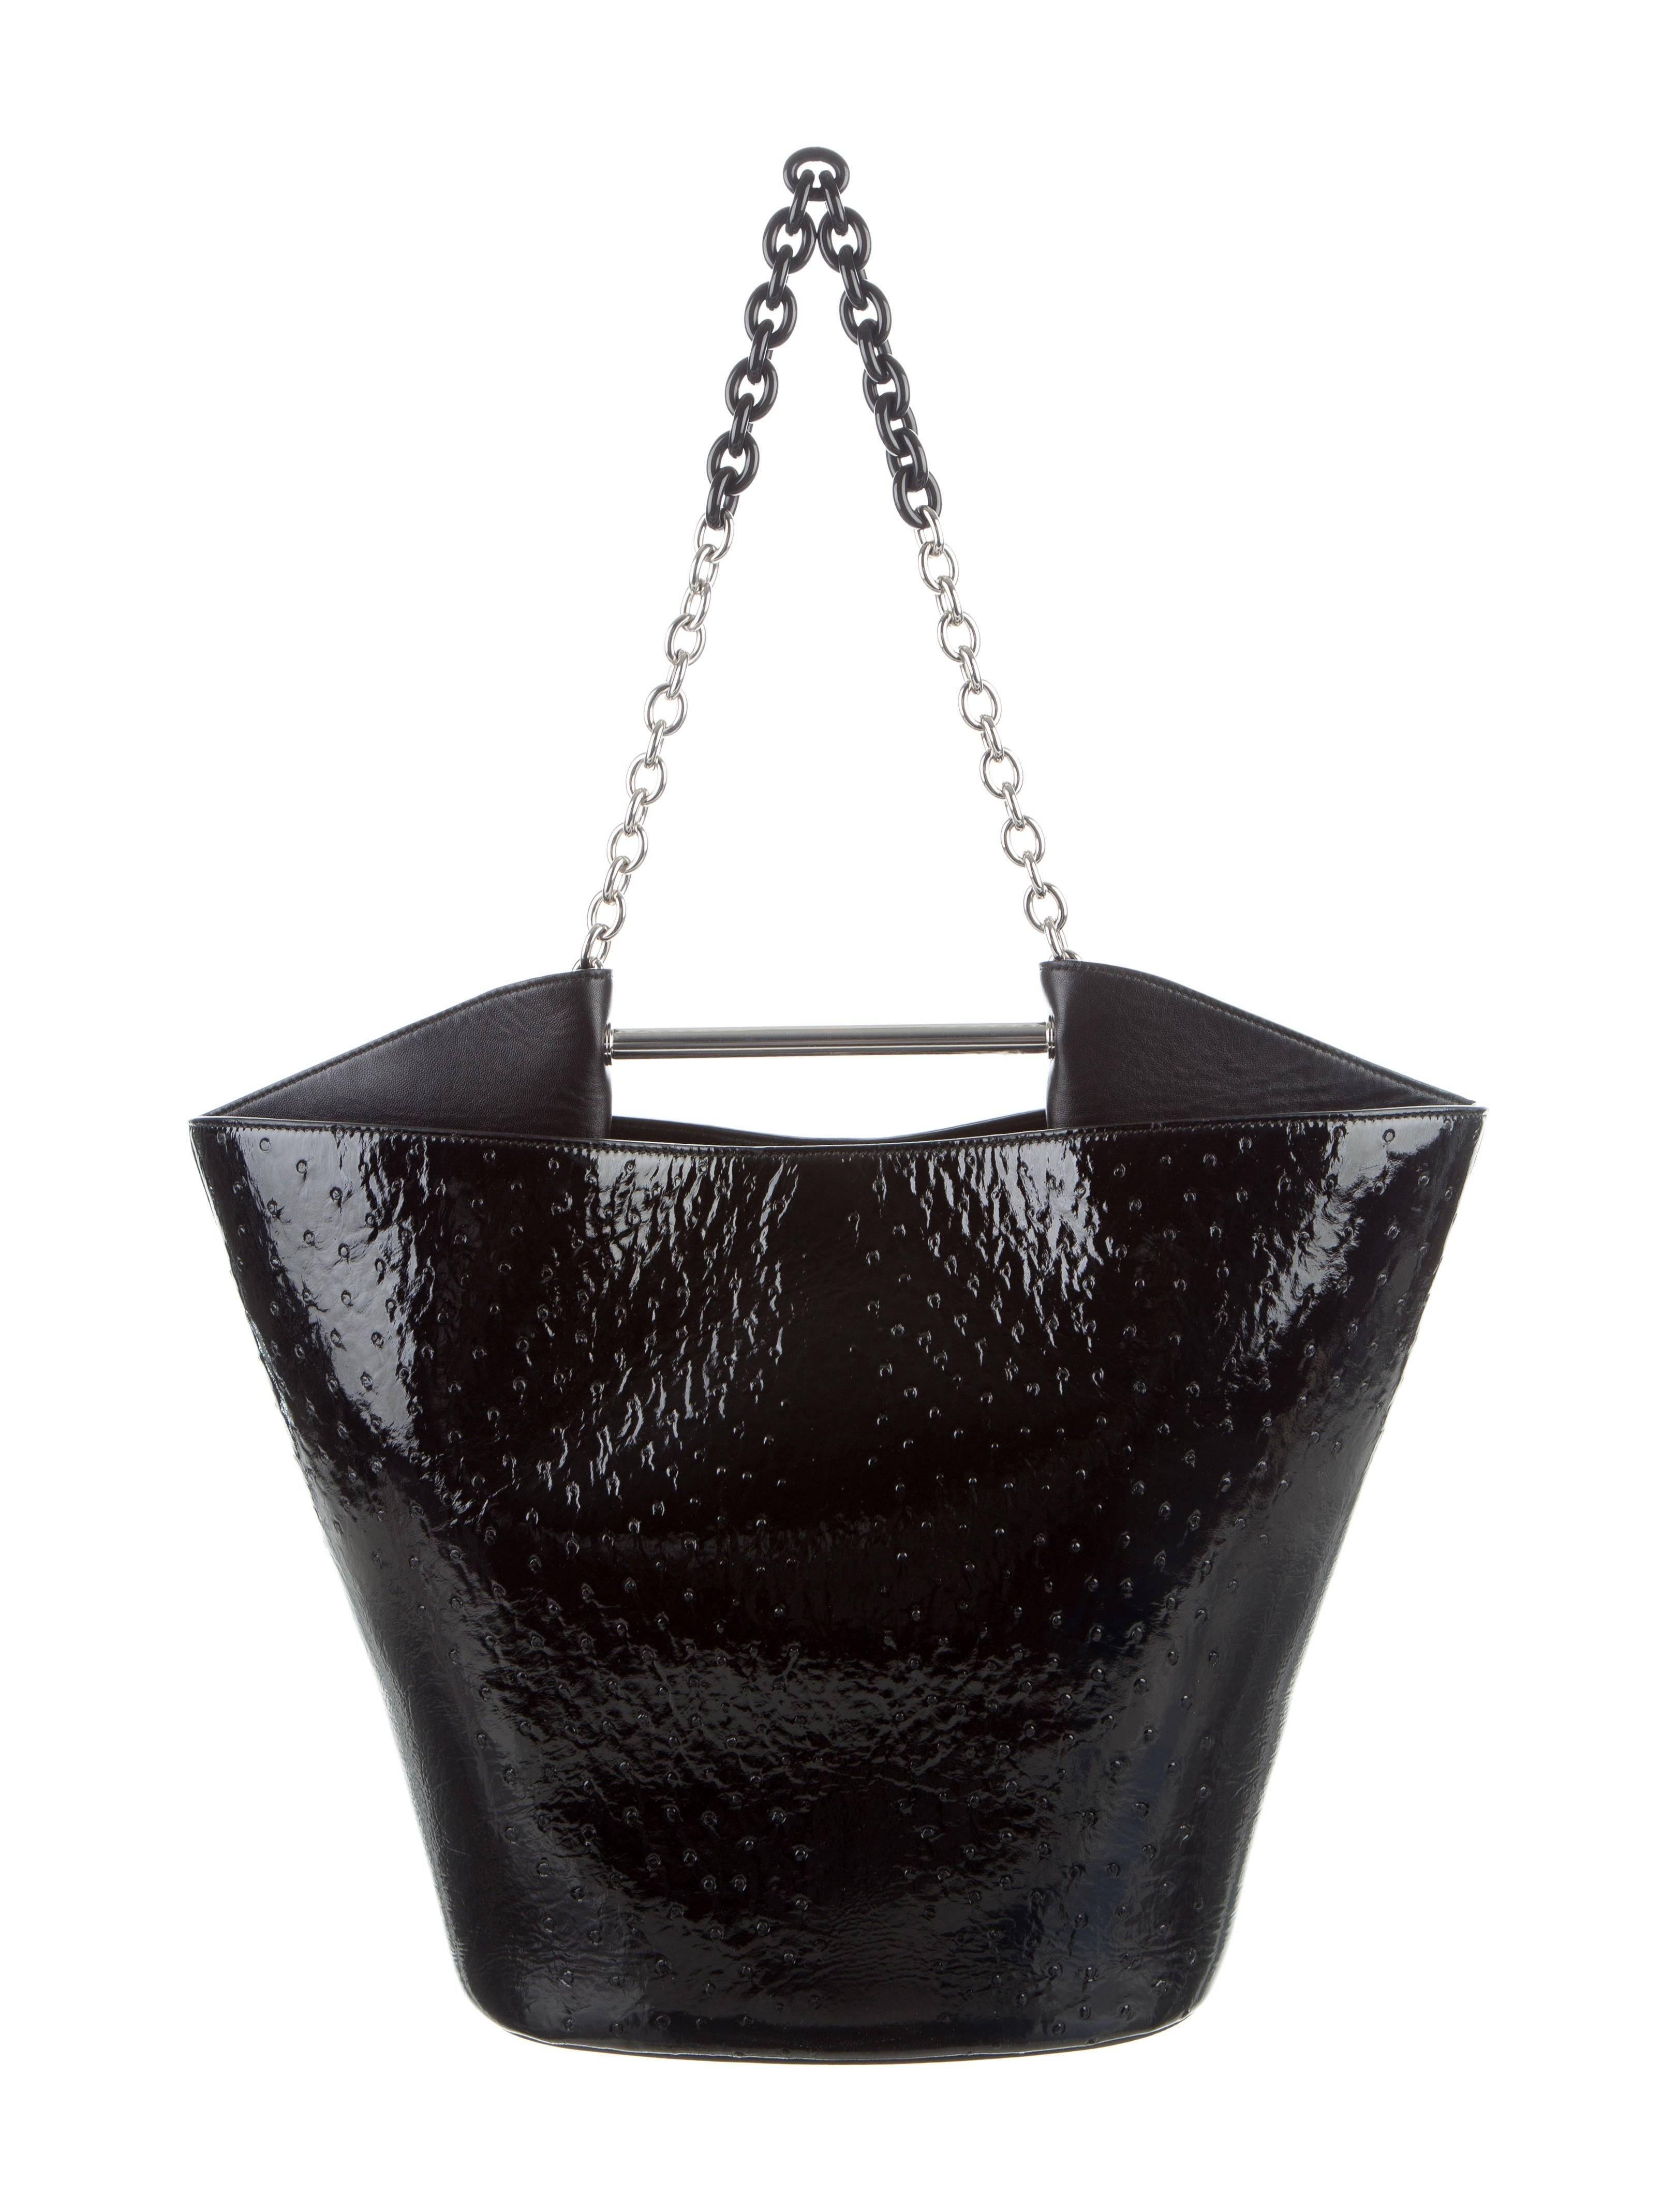 Balanciaga New Black Ostrich Exotic Skin Chain Carryall Top Handle Shoulder Bag

Original purchase price $5,995
Ostrich
Silver tone hardware
Leather lining
Made in Italy
Top handle drop 3"
Shoulder strap drop 11"
Measures 20" W x